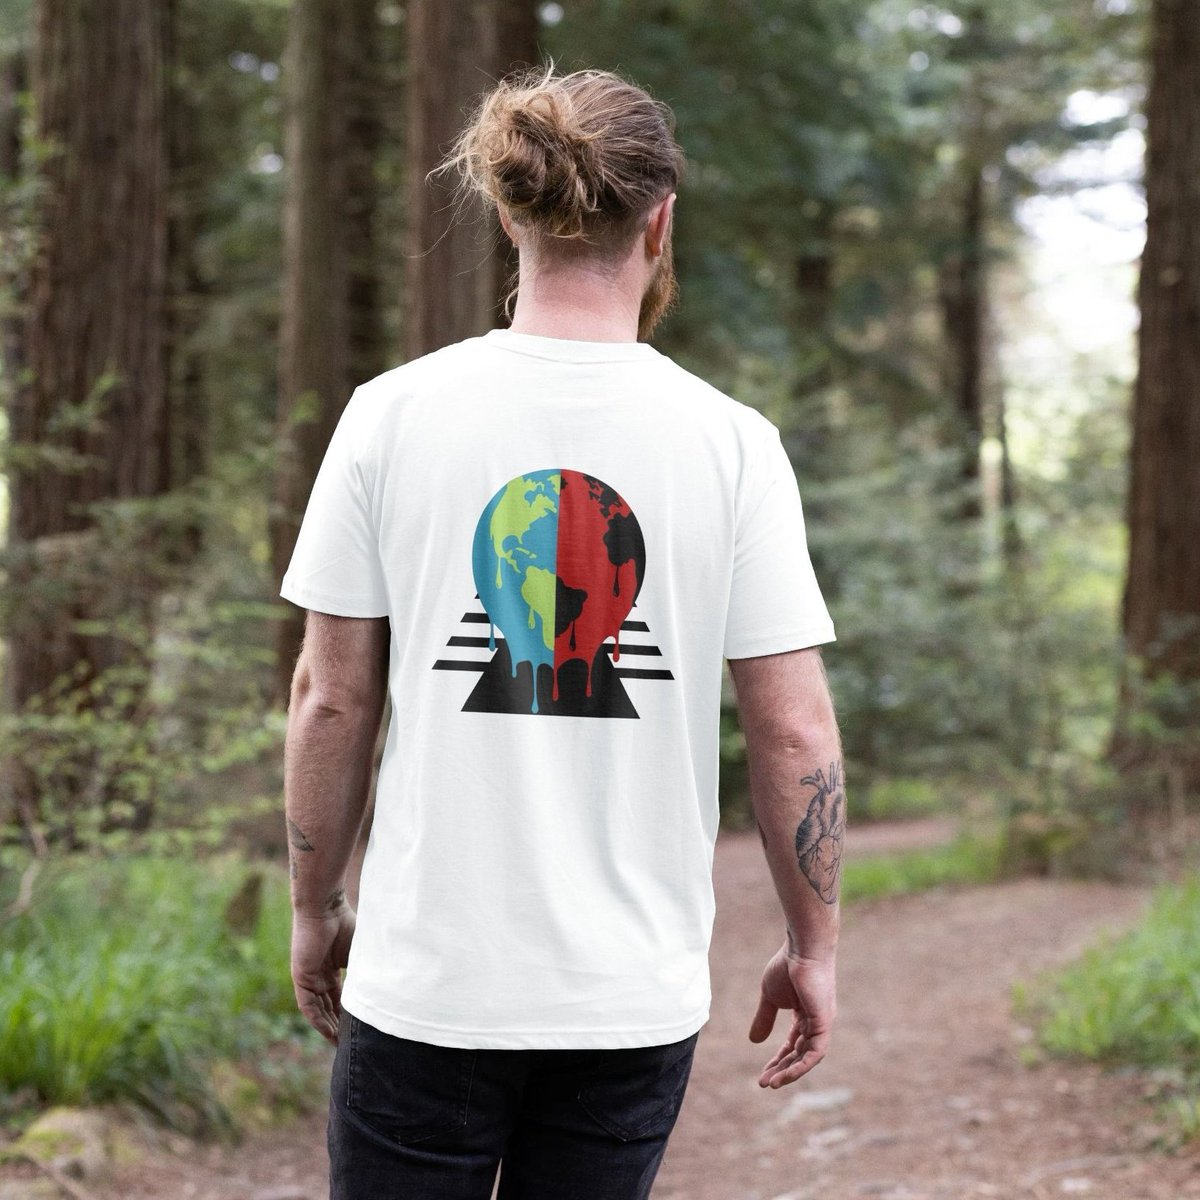 Limited Print #EarthDay tee, get yours while you can!

#earth #earthmonth #plasticsucks #sustainability #sustainable #limitededition #limited #novapparel

novapparel.co.uk